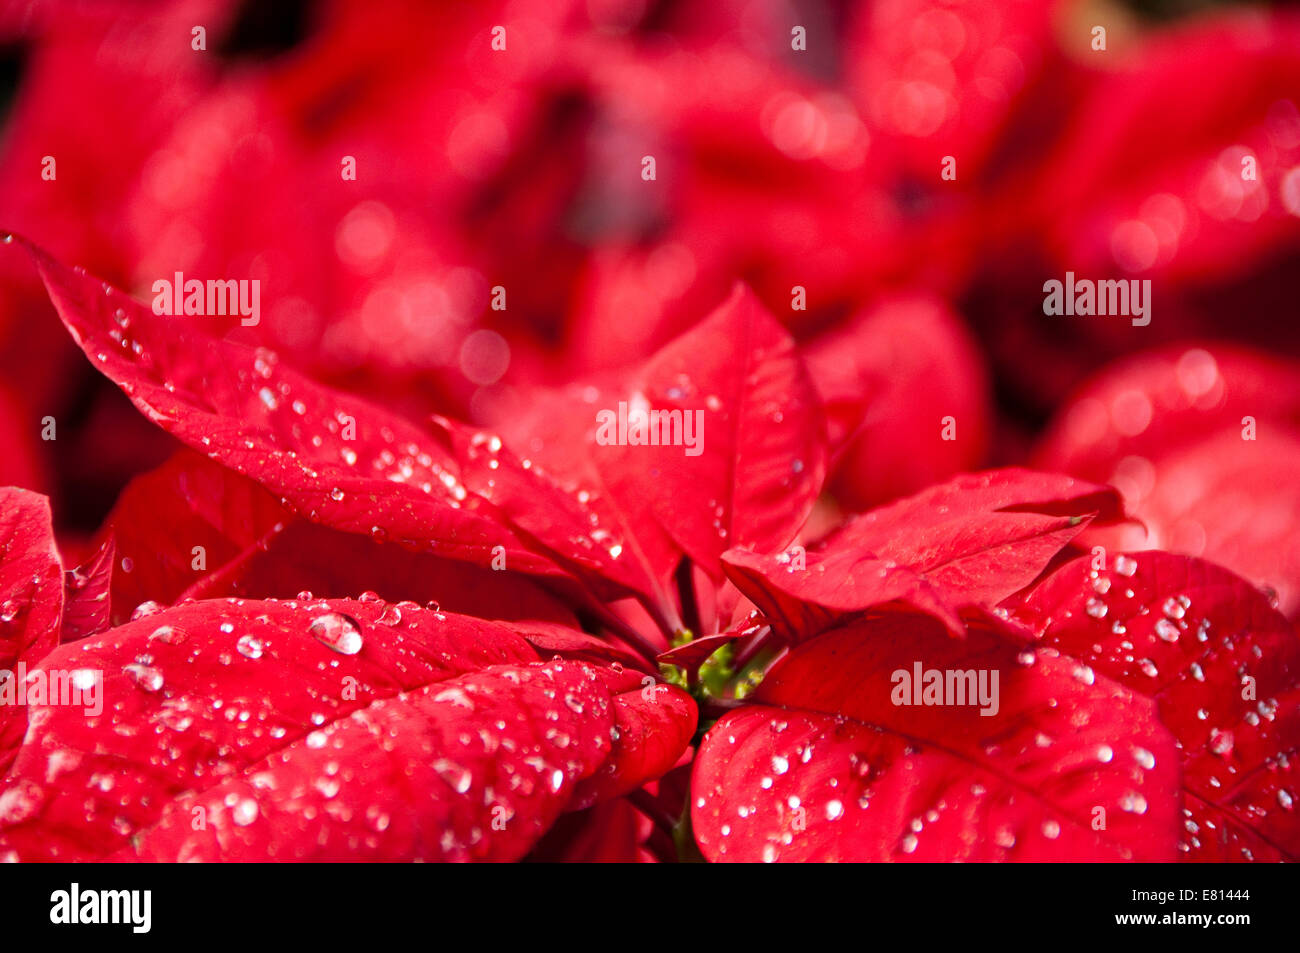 Horizontal close up of a bright red poinsettia covered in dew drops at Christmas. Stock Photo